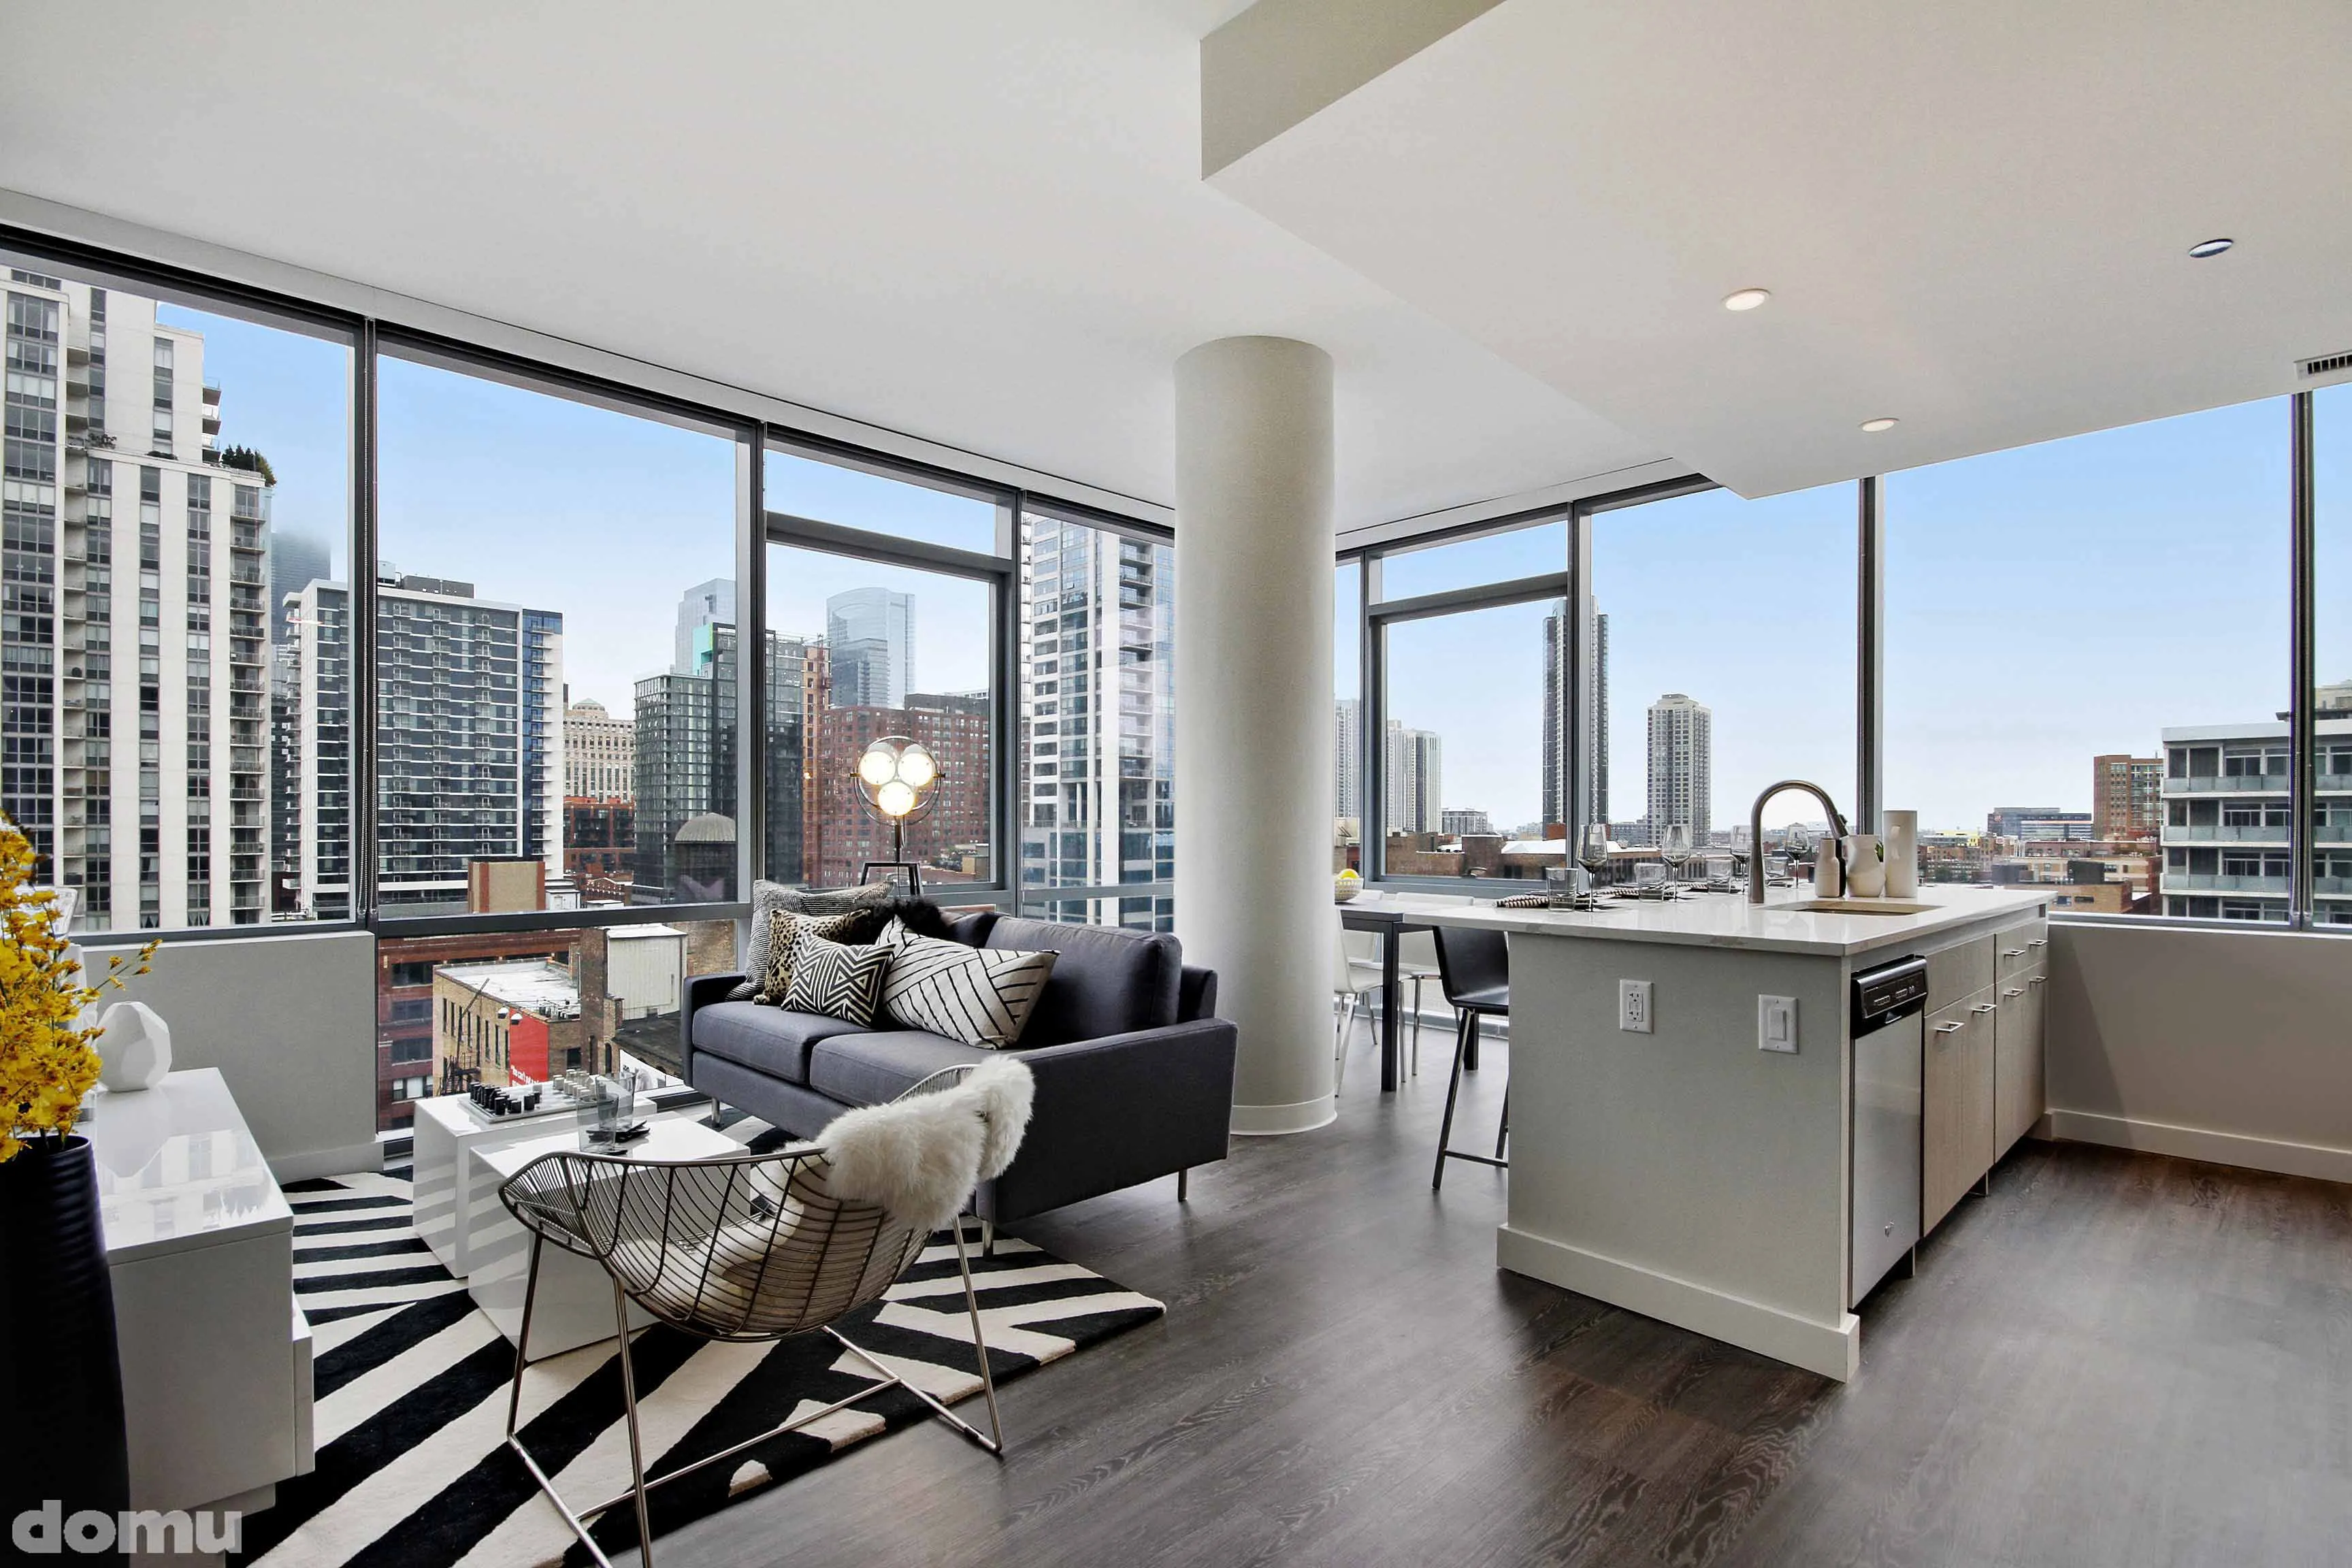 living room model unit at 640 North Wells Apartments in River North Chicago